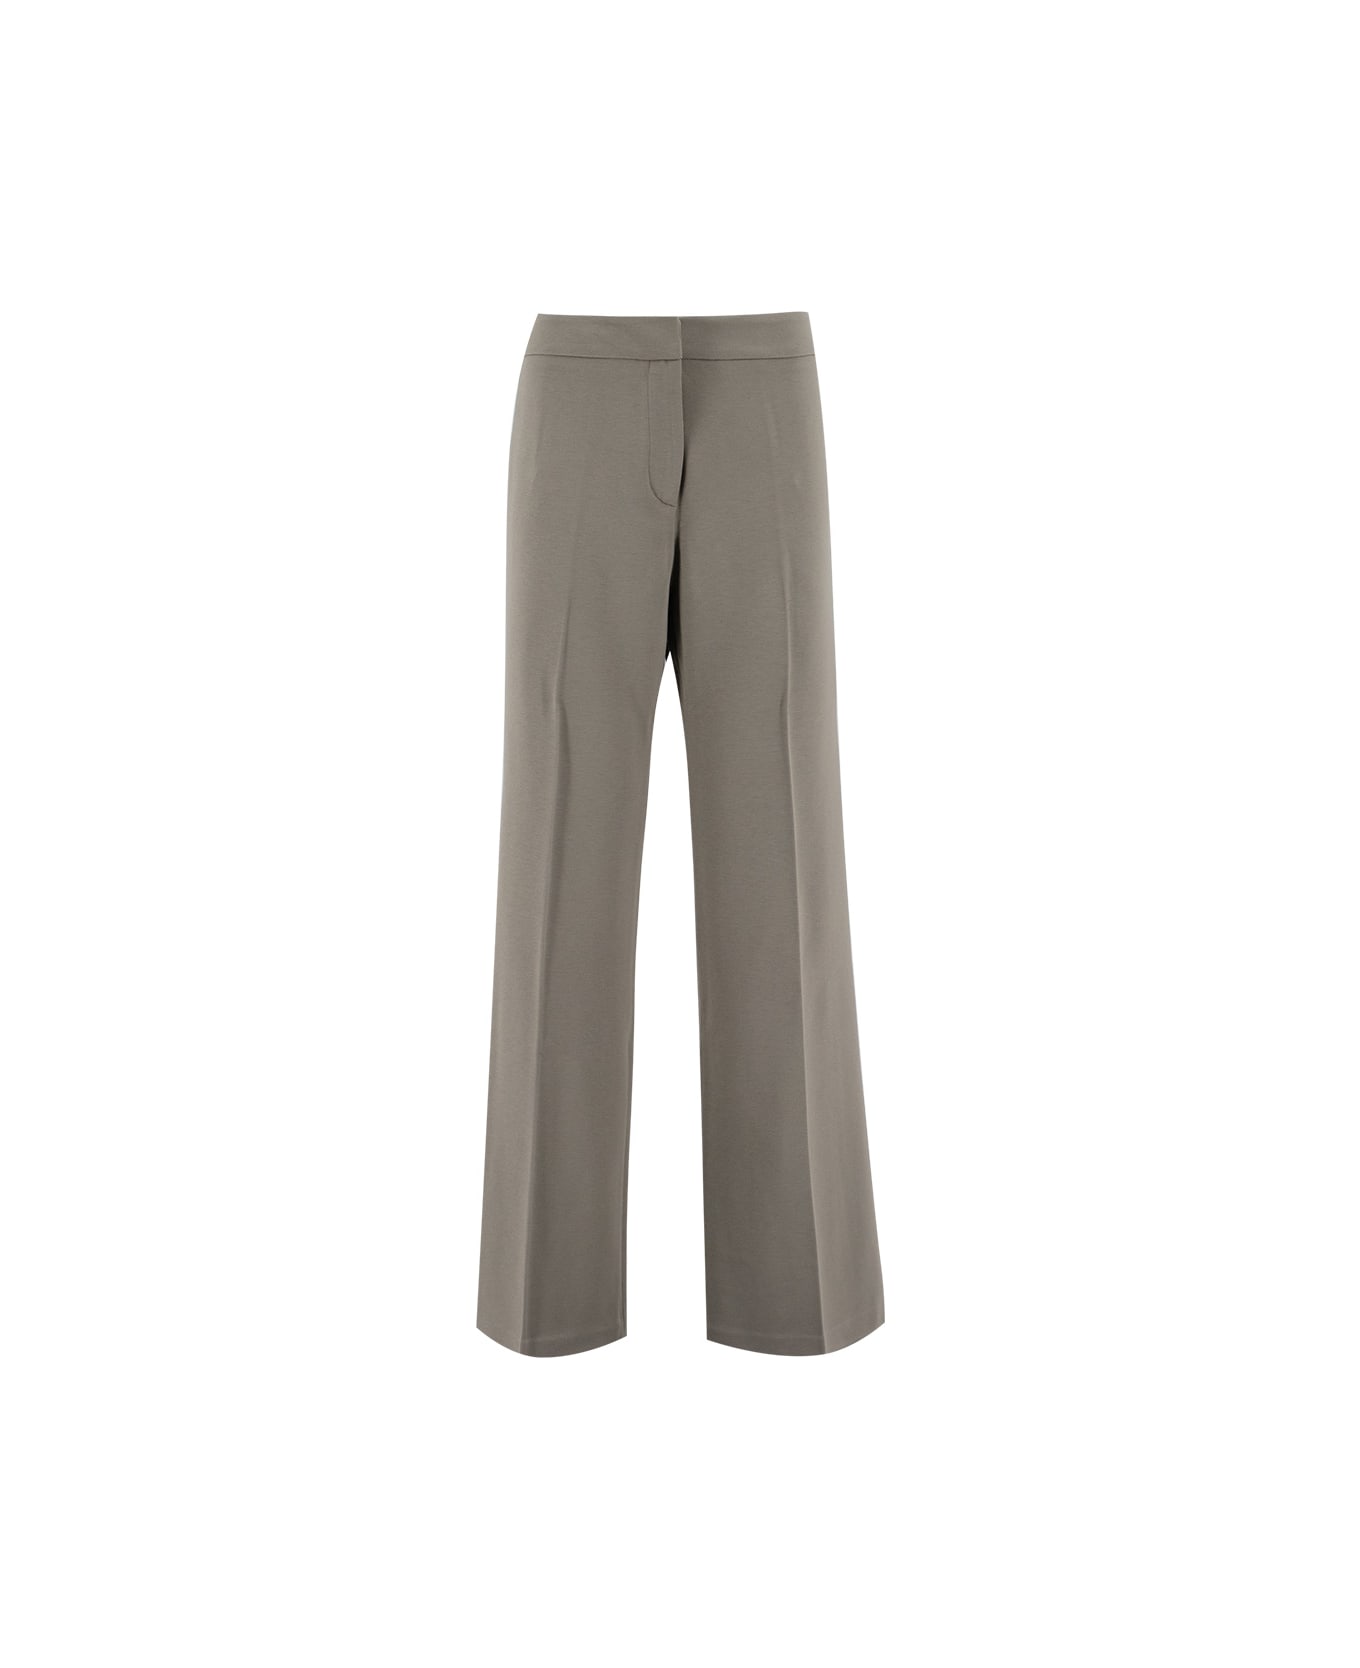 Le Tricot Perugia Trousers - MIDDLE GREY